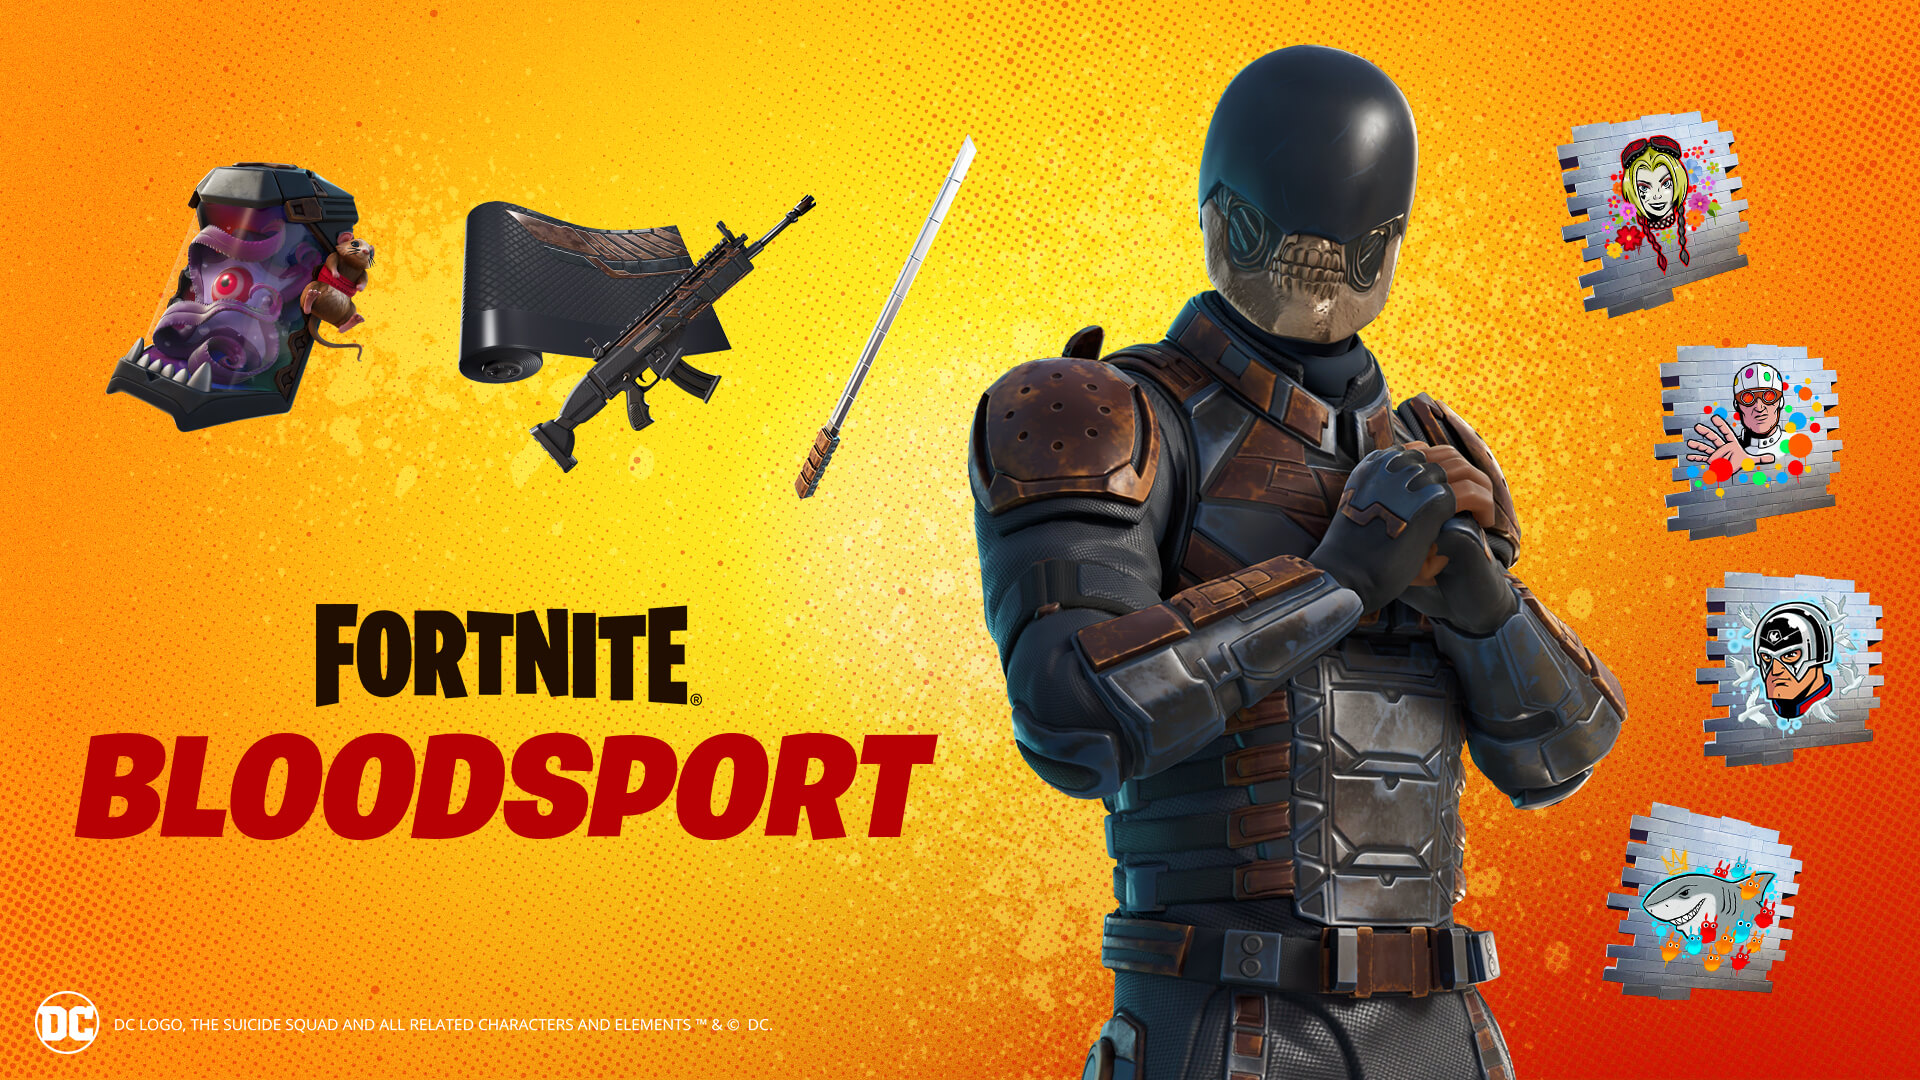 DC's Bloodsport has arrived in Fortnite